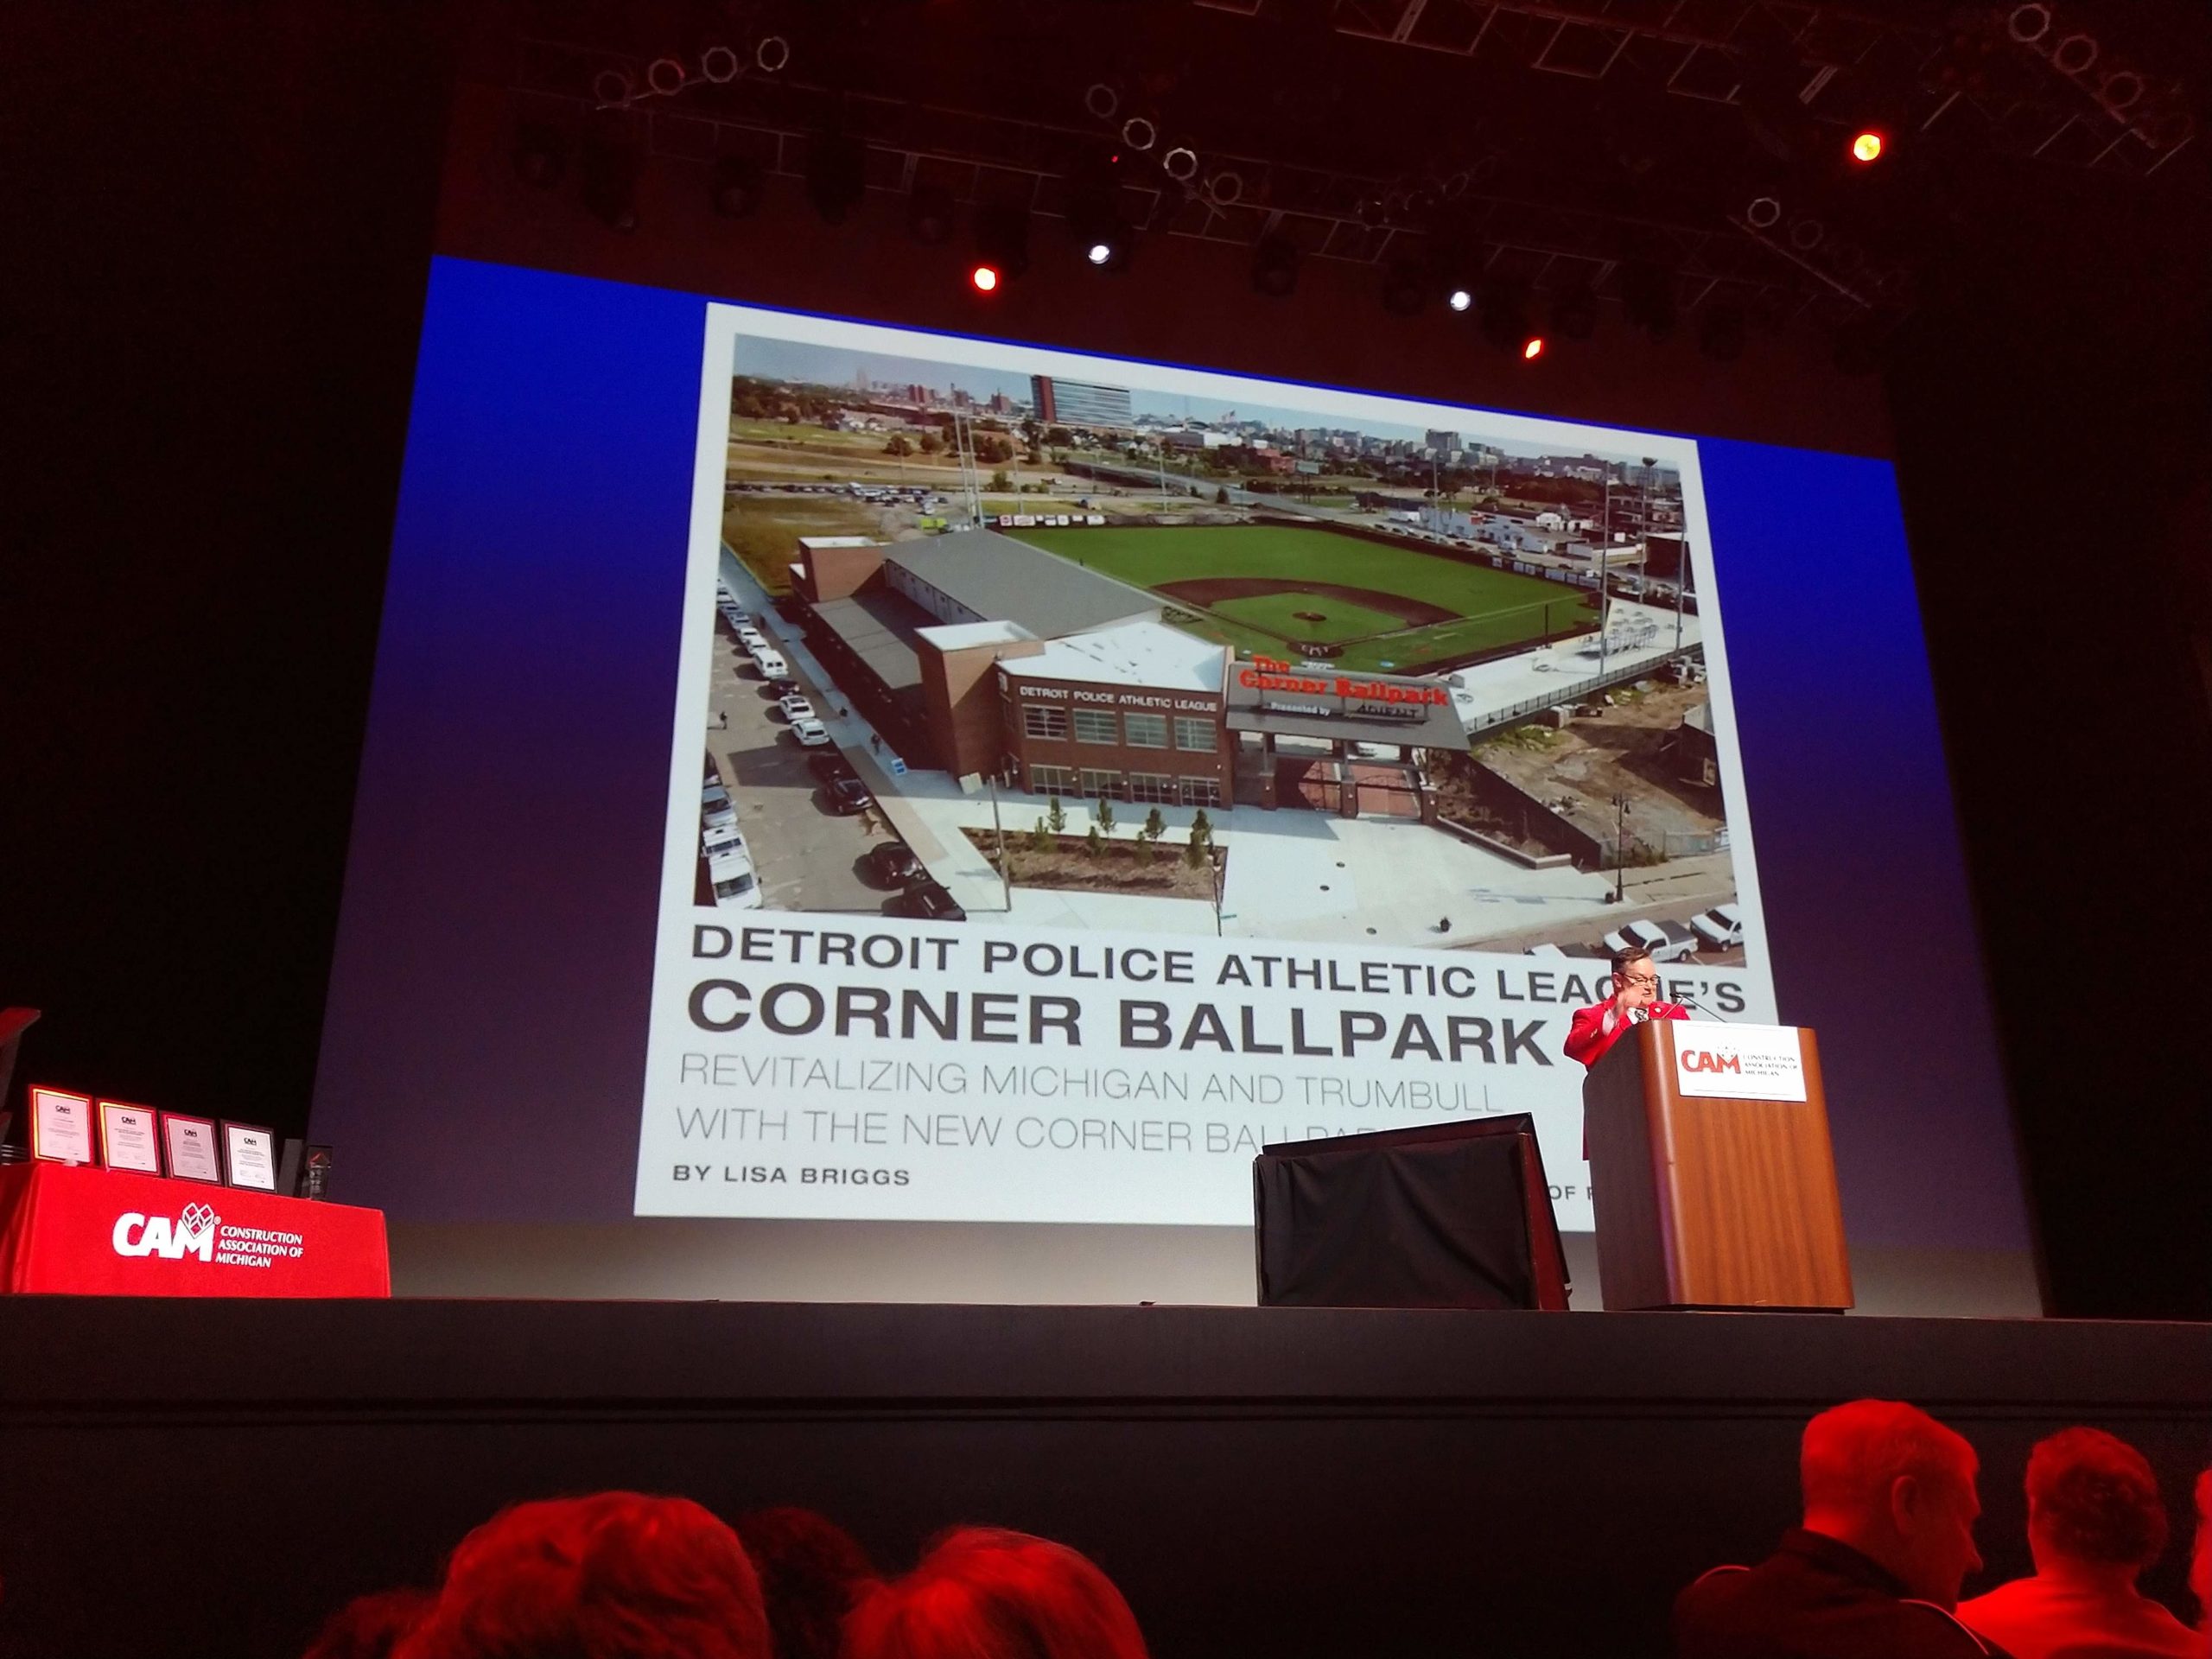 The Corner Ballpark Project is Recognized as a Special Project for 2018.